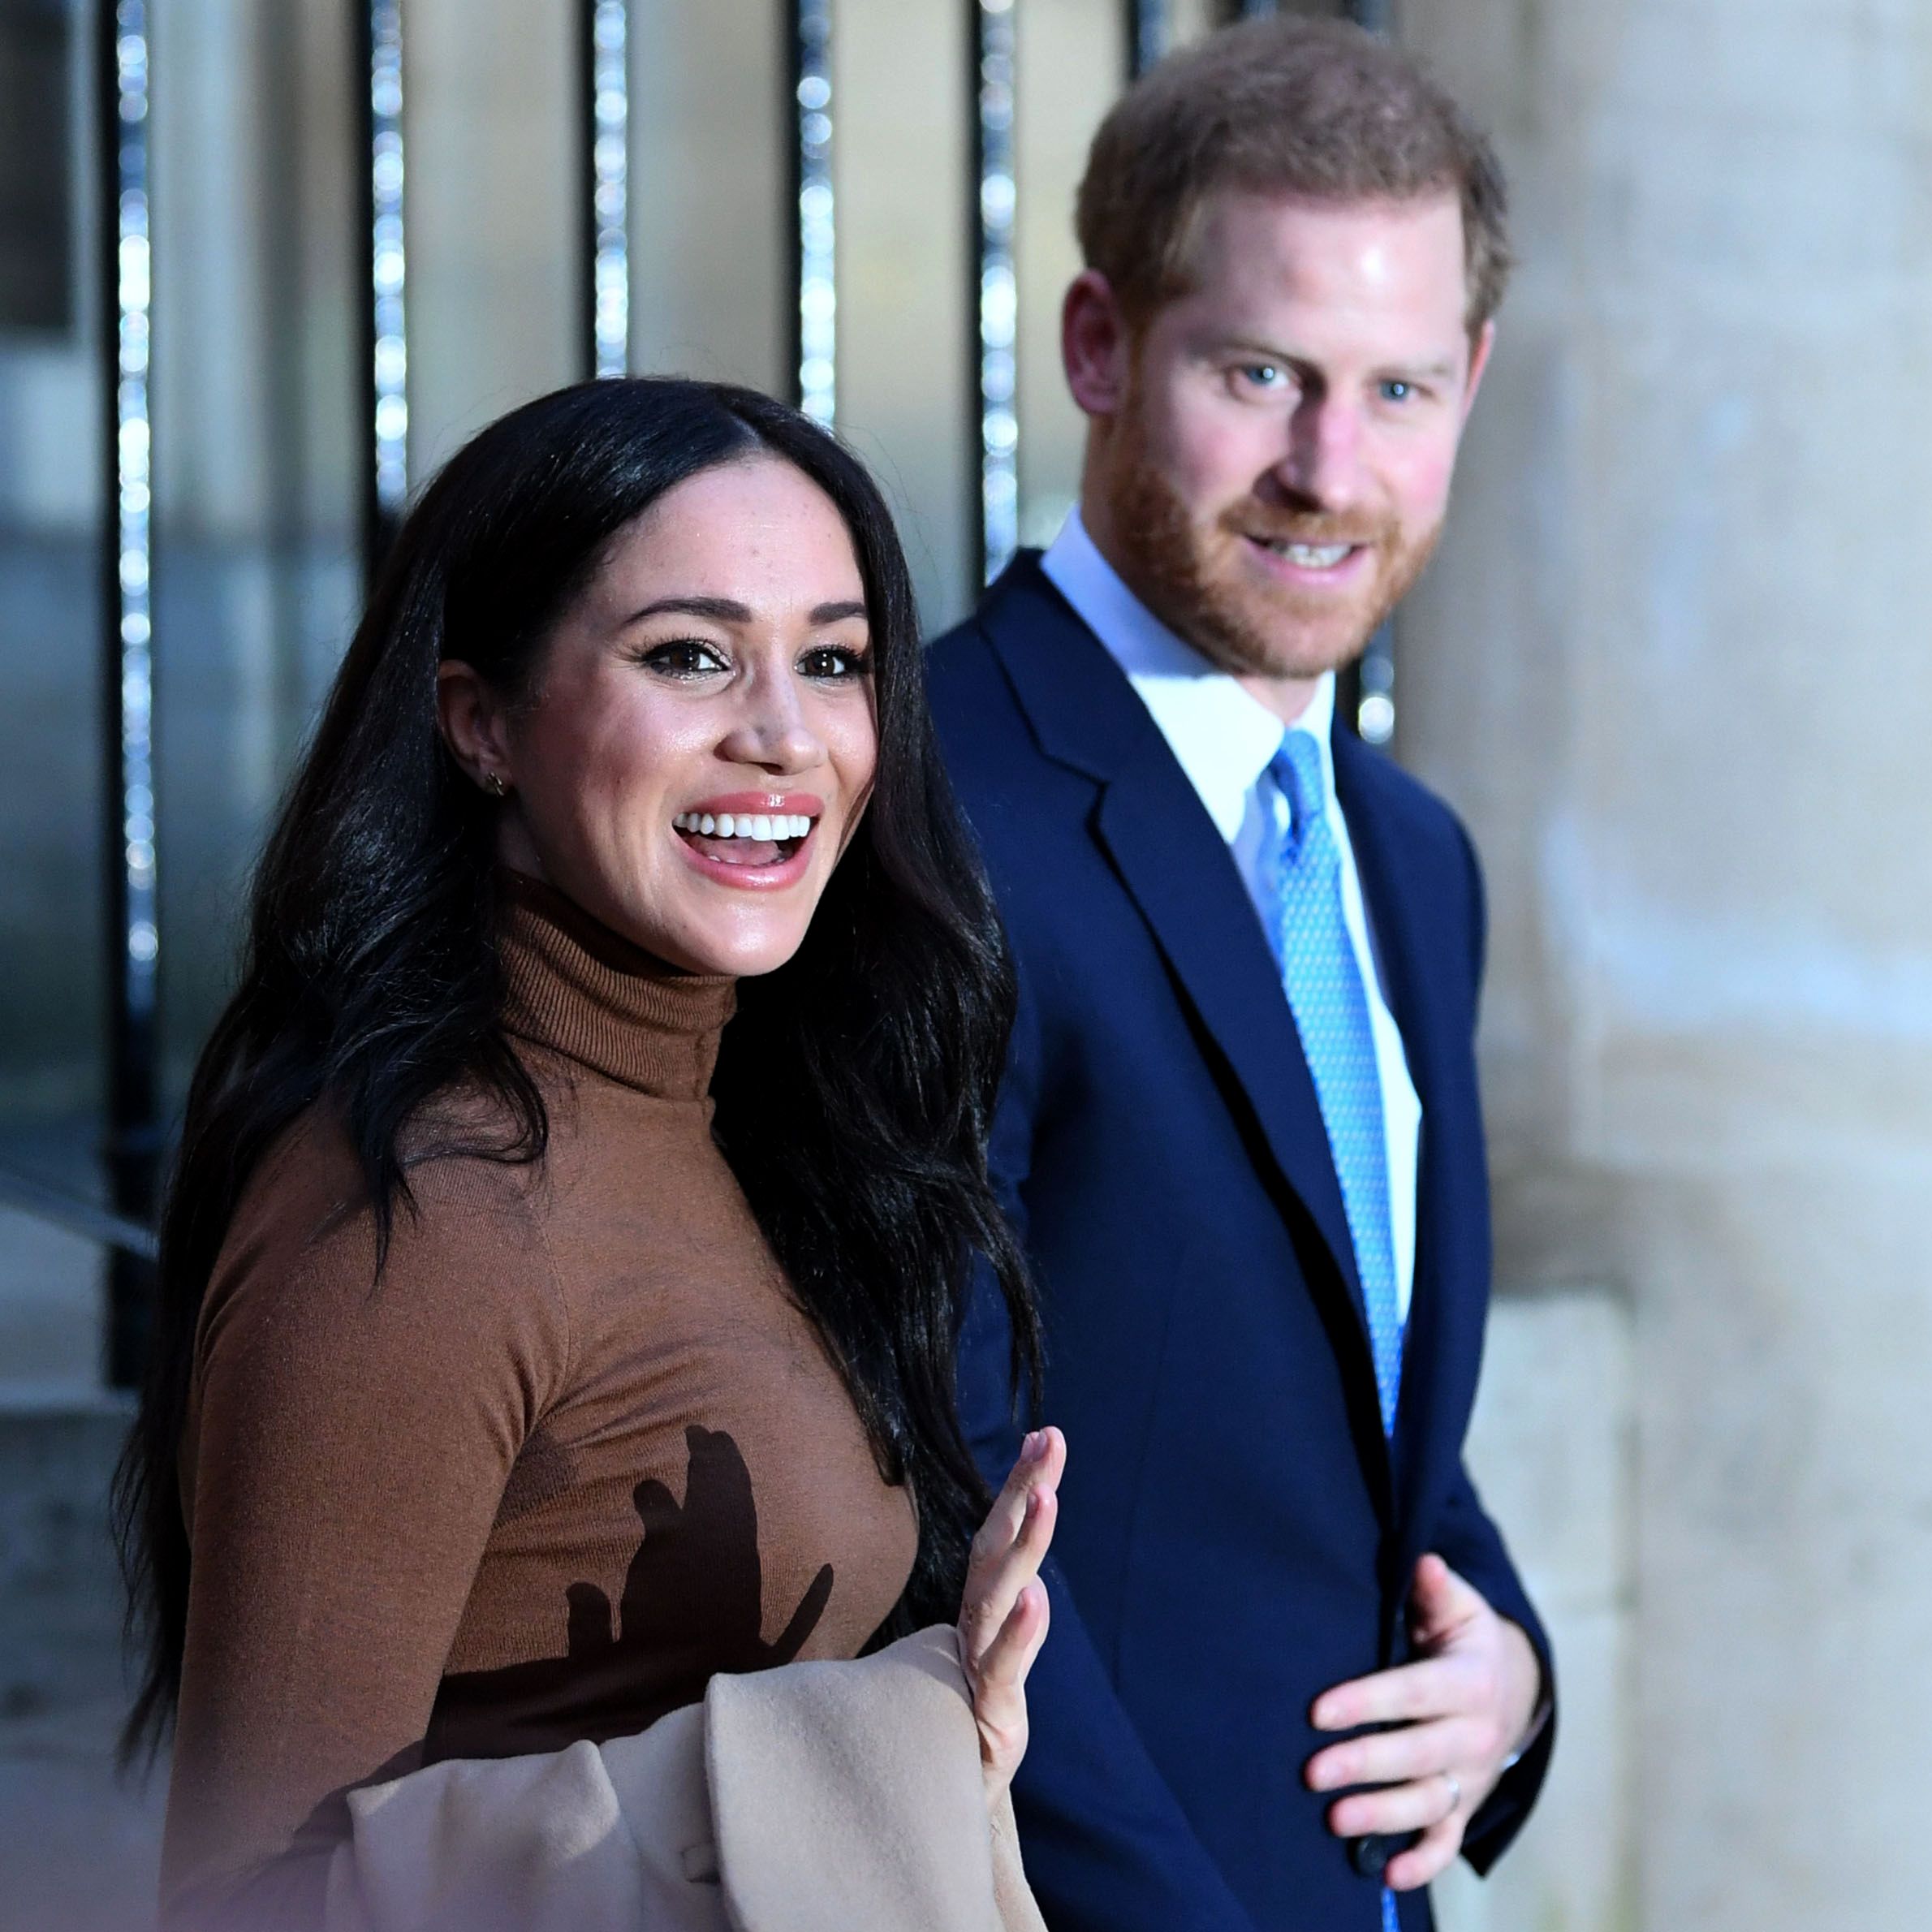 Here's Why Meghan Markle and Prince Harry Aren't on the Balcony with the Other Royals Today